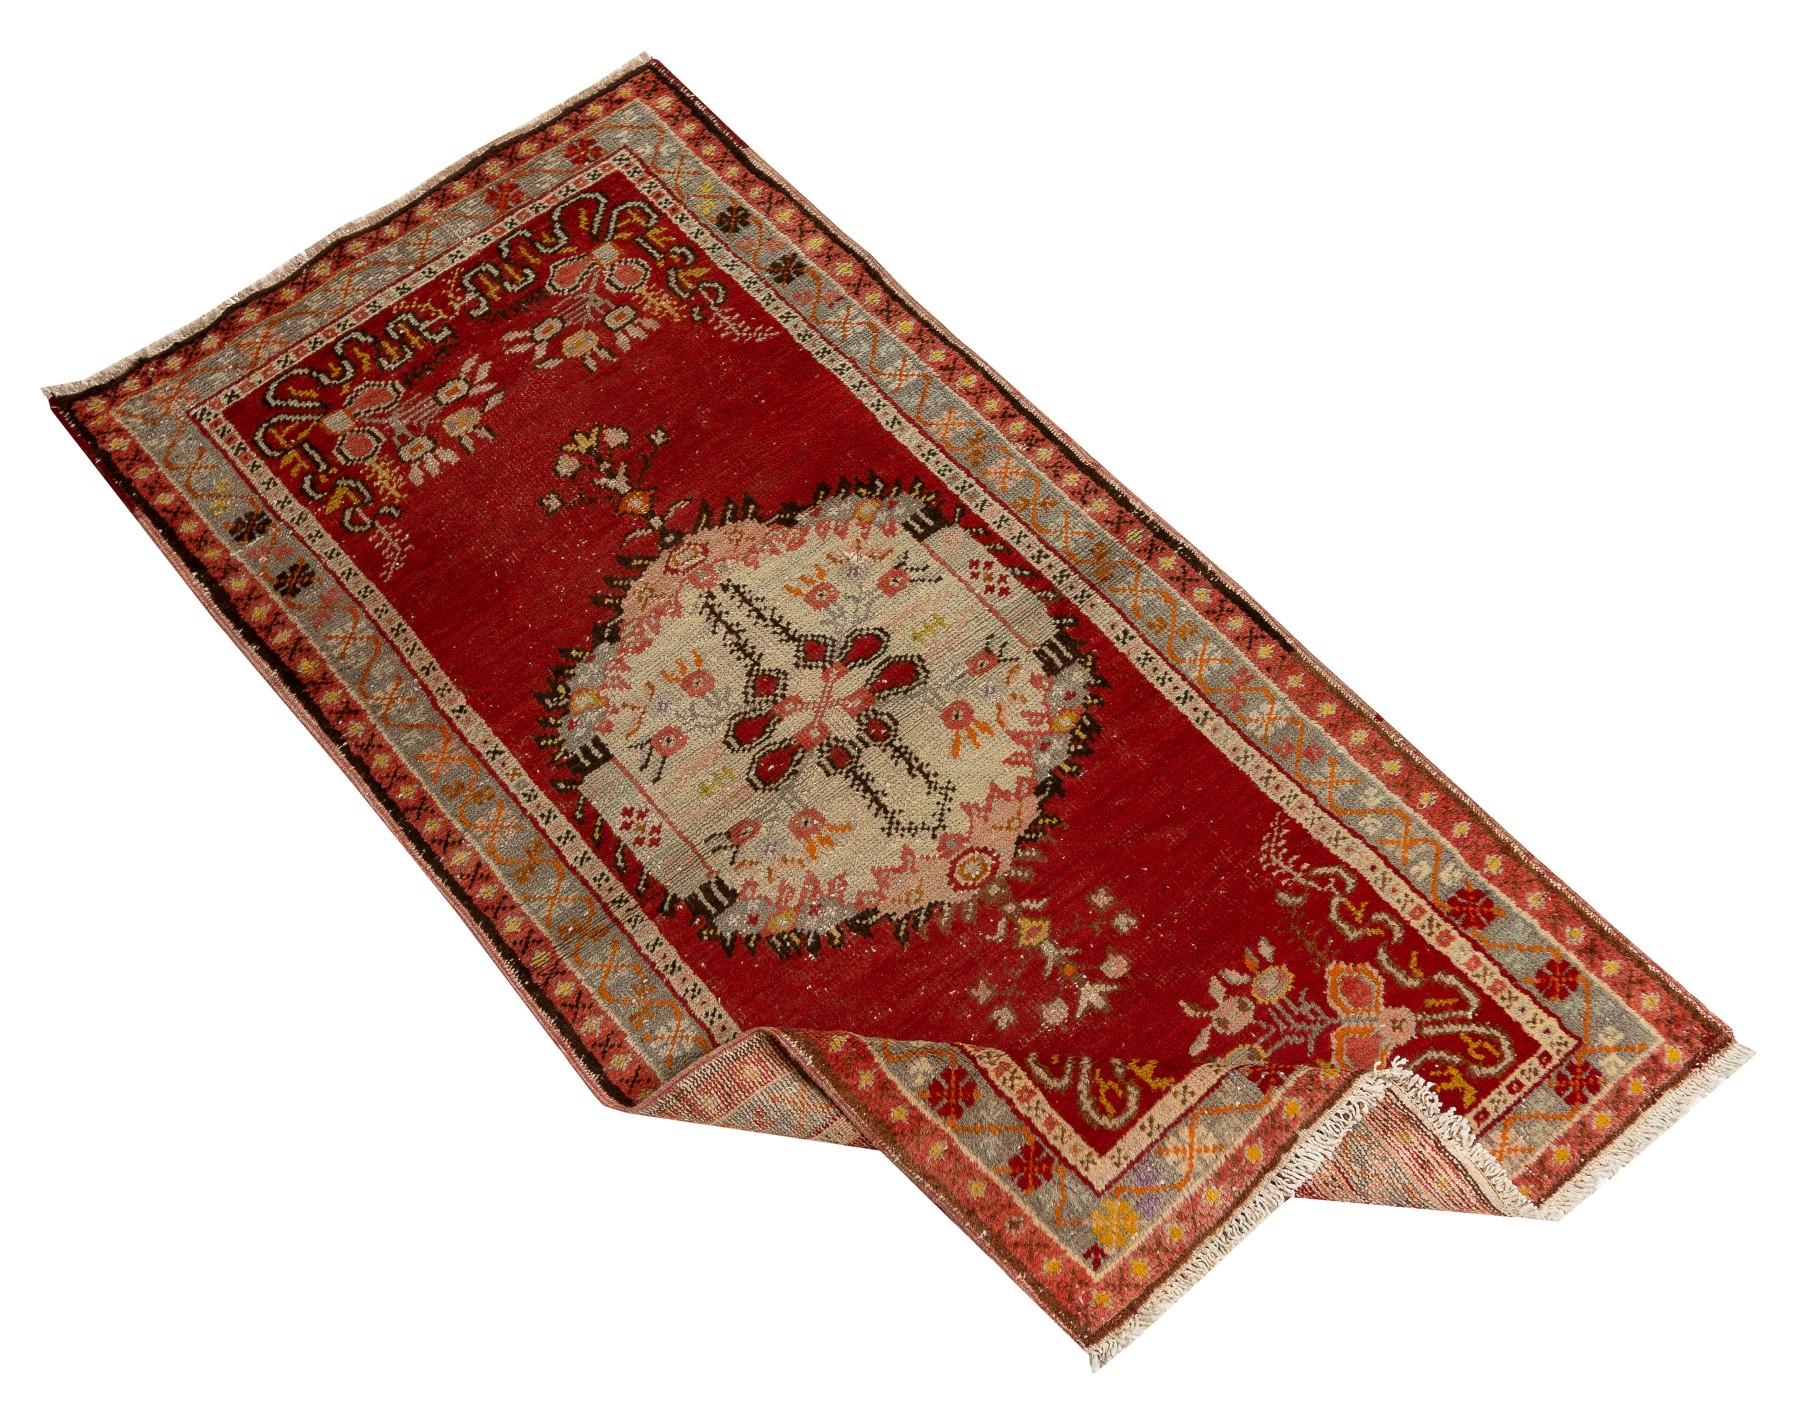 A finely hand-knotted vintage Turkish carpet from 1960s featuring a medallion design. The rug has even low wool pile on cotton foundation. It is heavy and lays flat on the floor, in very good condition with no issues. It has been washed